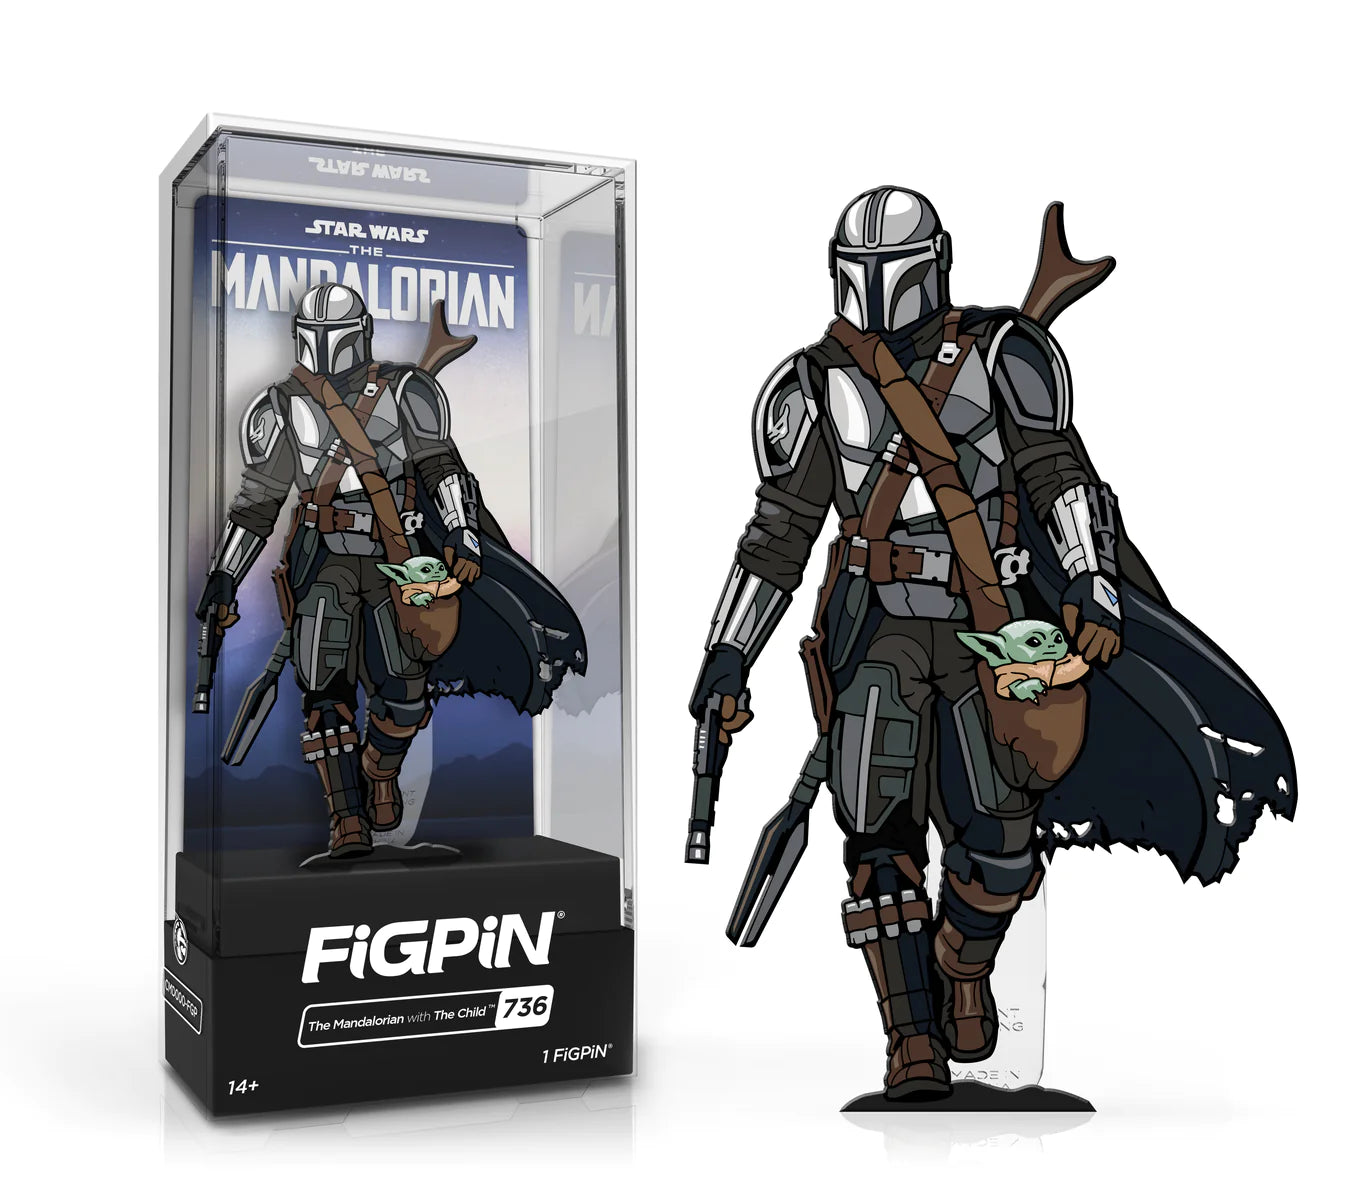 FiGPiN Star Wars The Mandalorian with The Child (736)